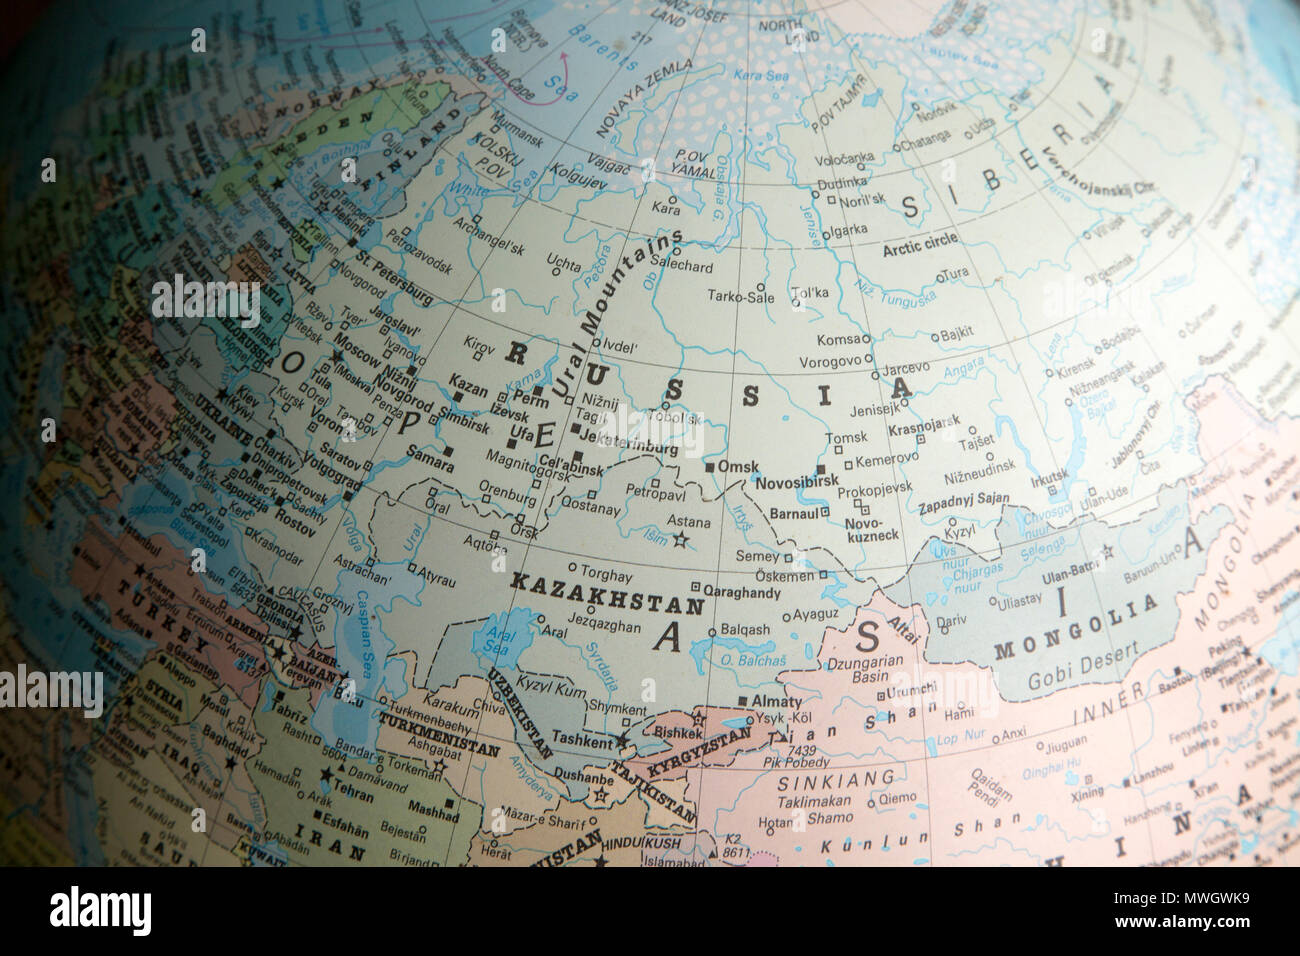 Eastern Europe and Asia map on a globe focused on Russia Stock Photo